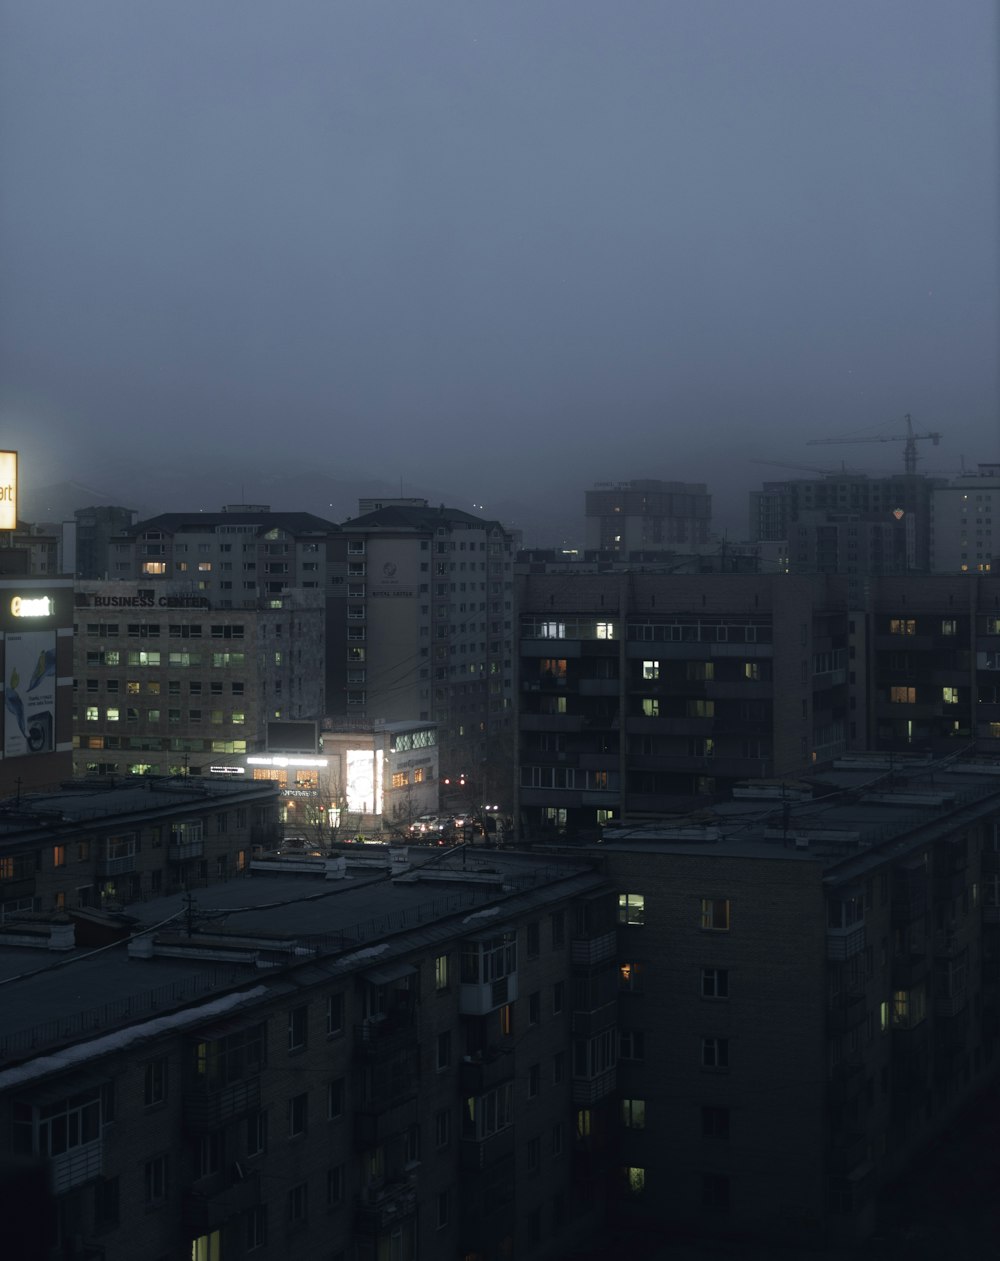 city buildings under gray sky during night time